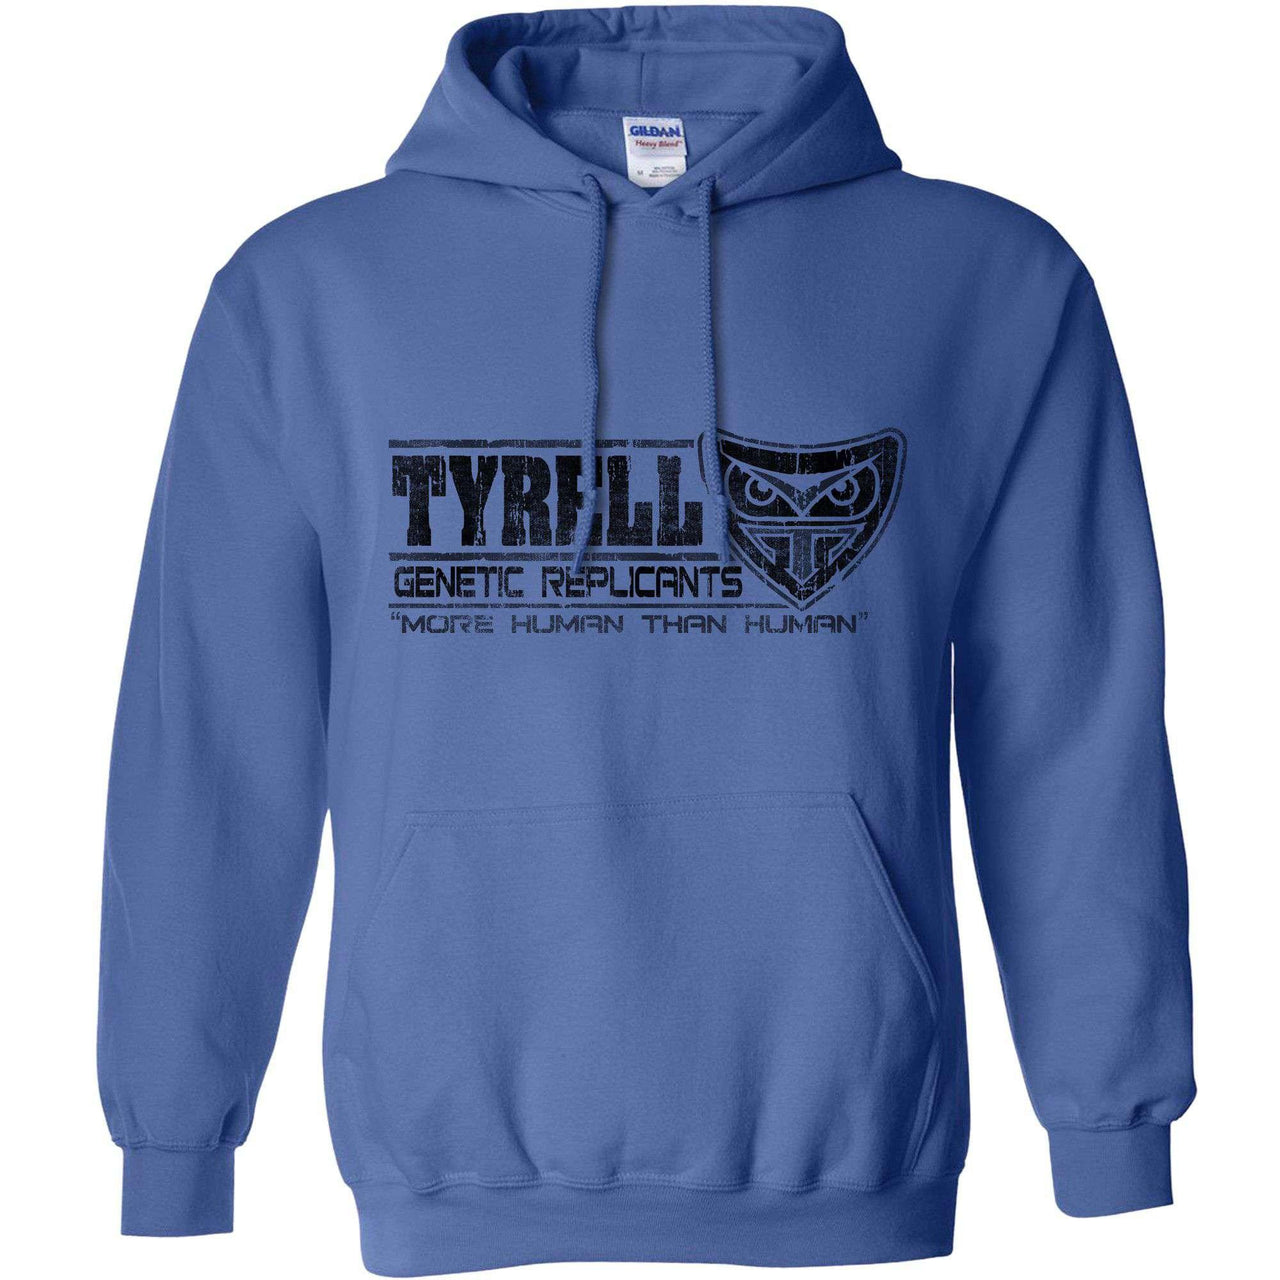 Tyrell Replicants Hoodie For Men and Women 8Ball